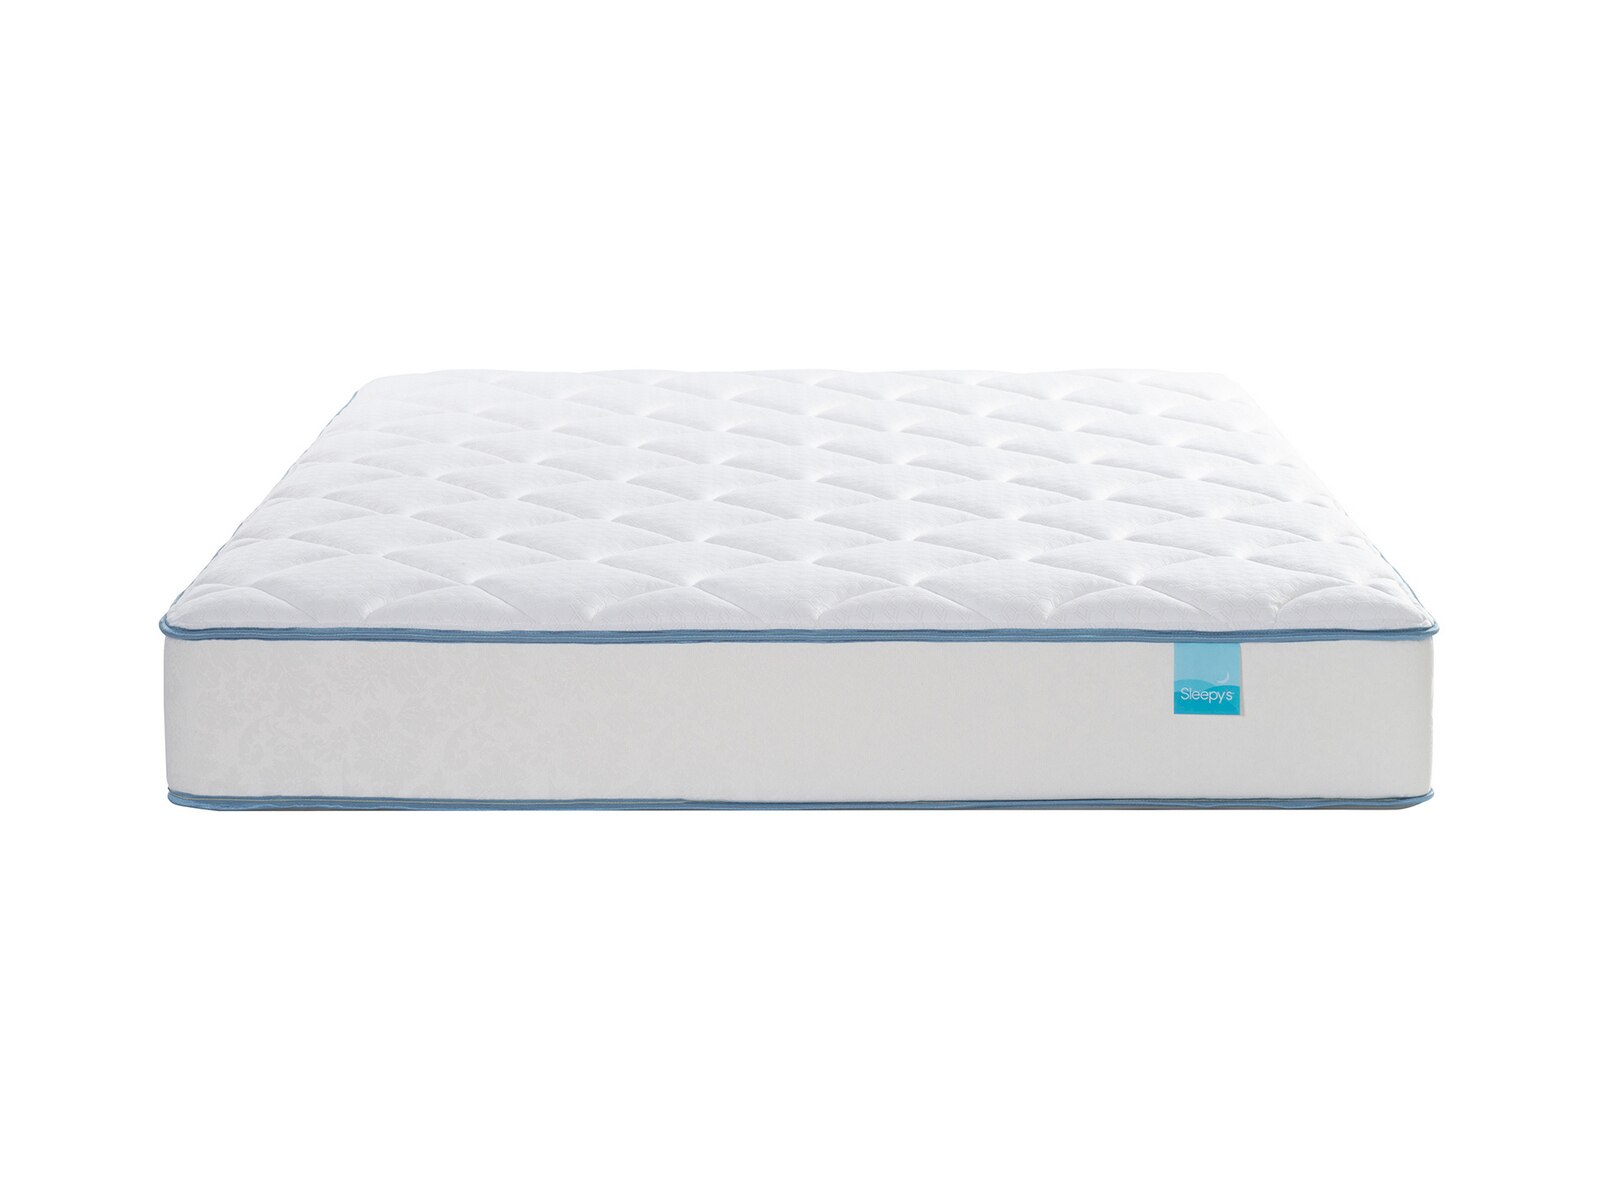 quilted foam mattress meaning